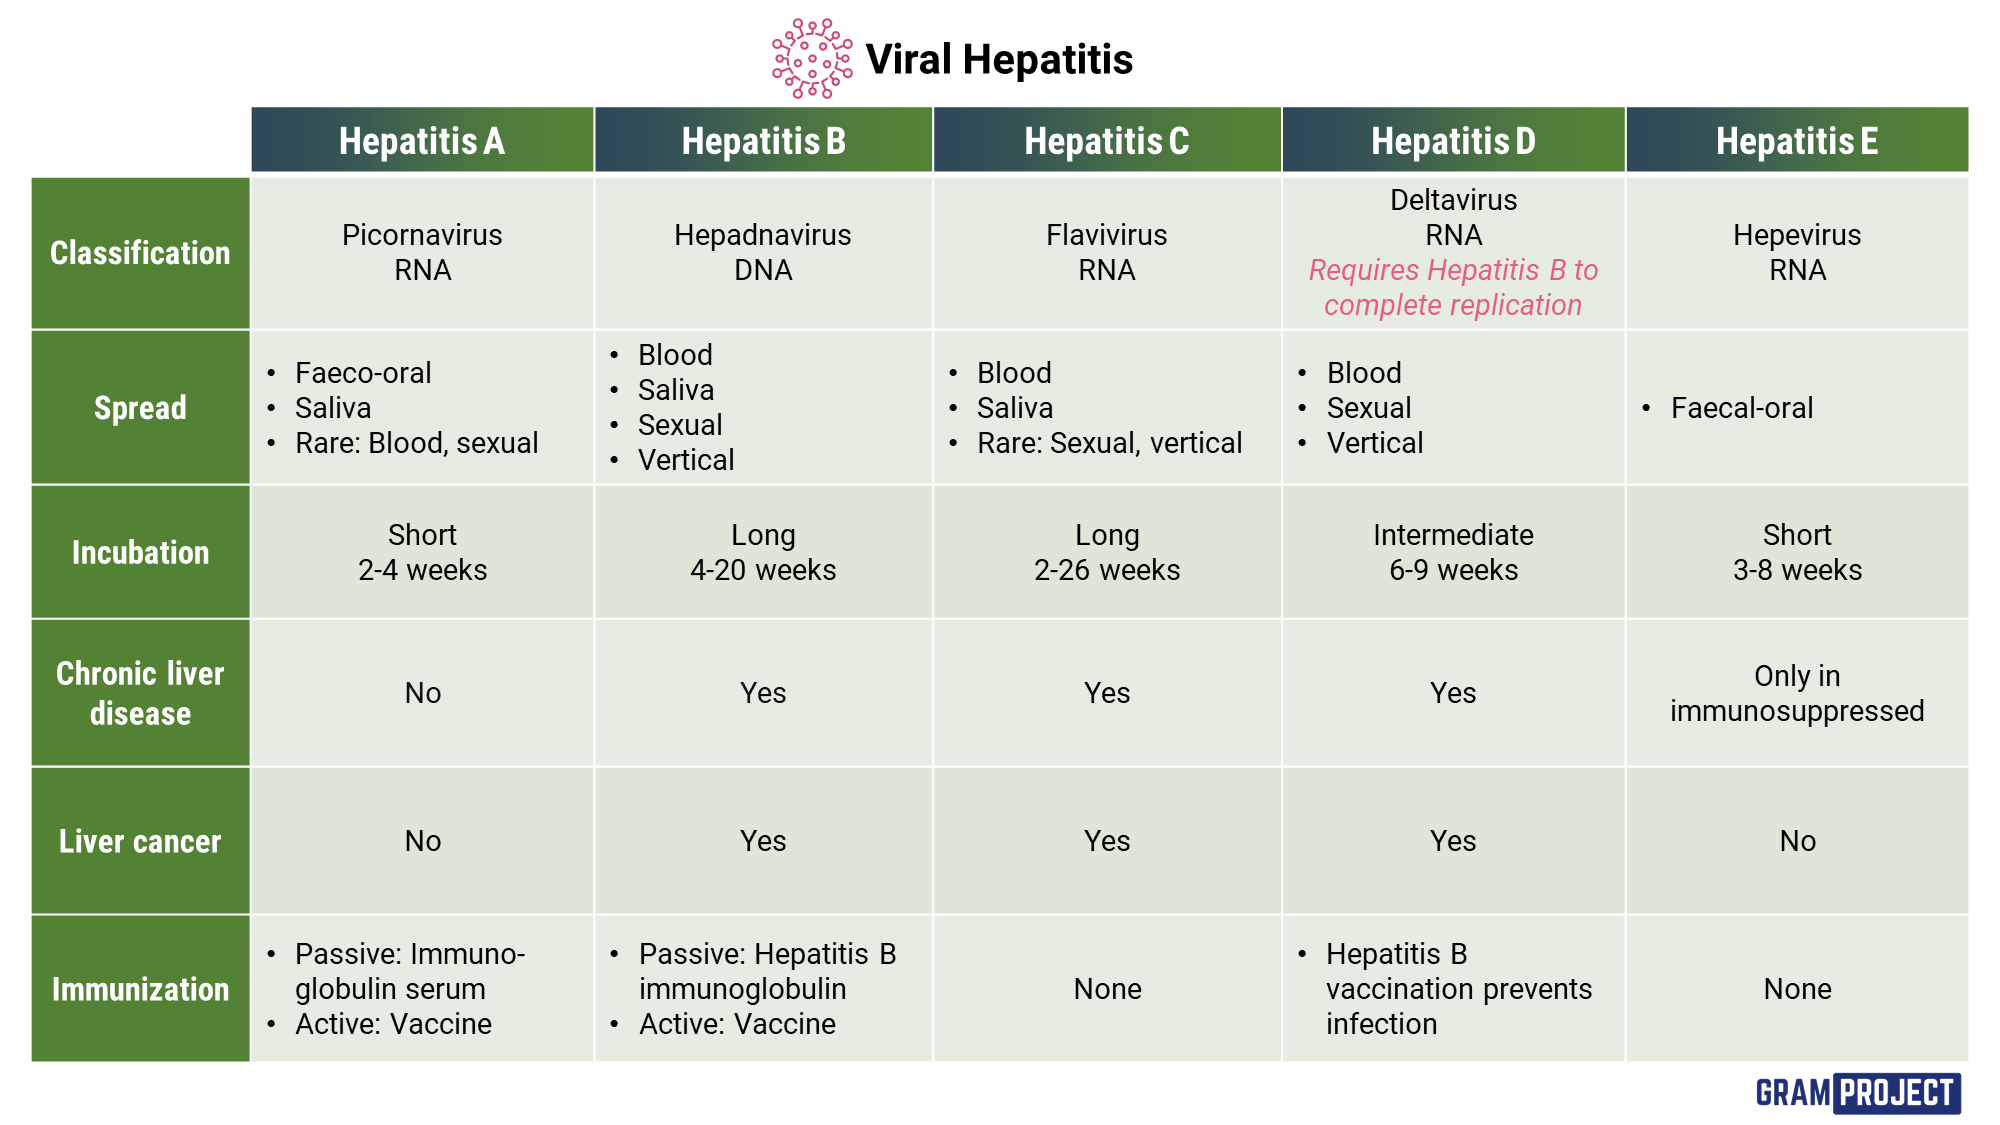 Summary table comparing the different types of viral hepatitis